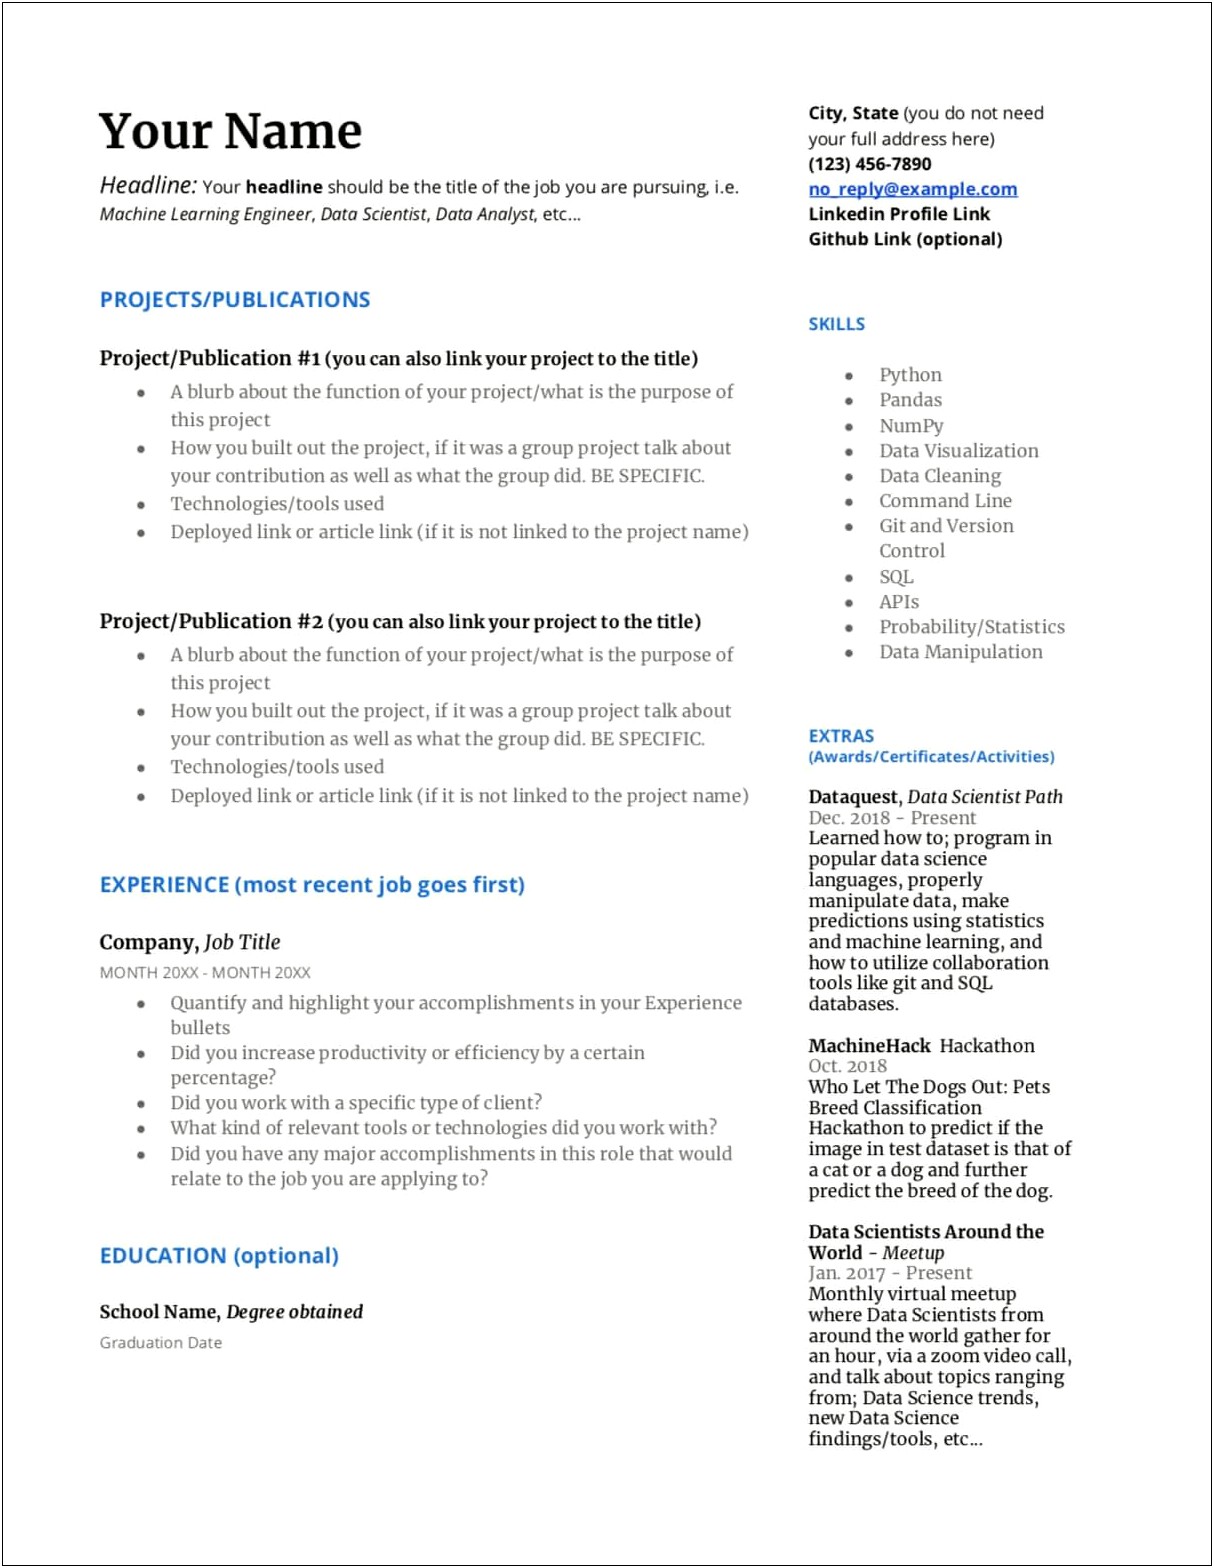 Sample Resume With Two Addresses